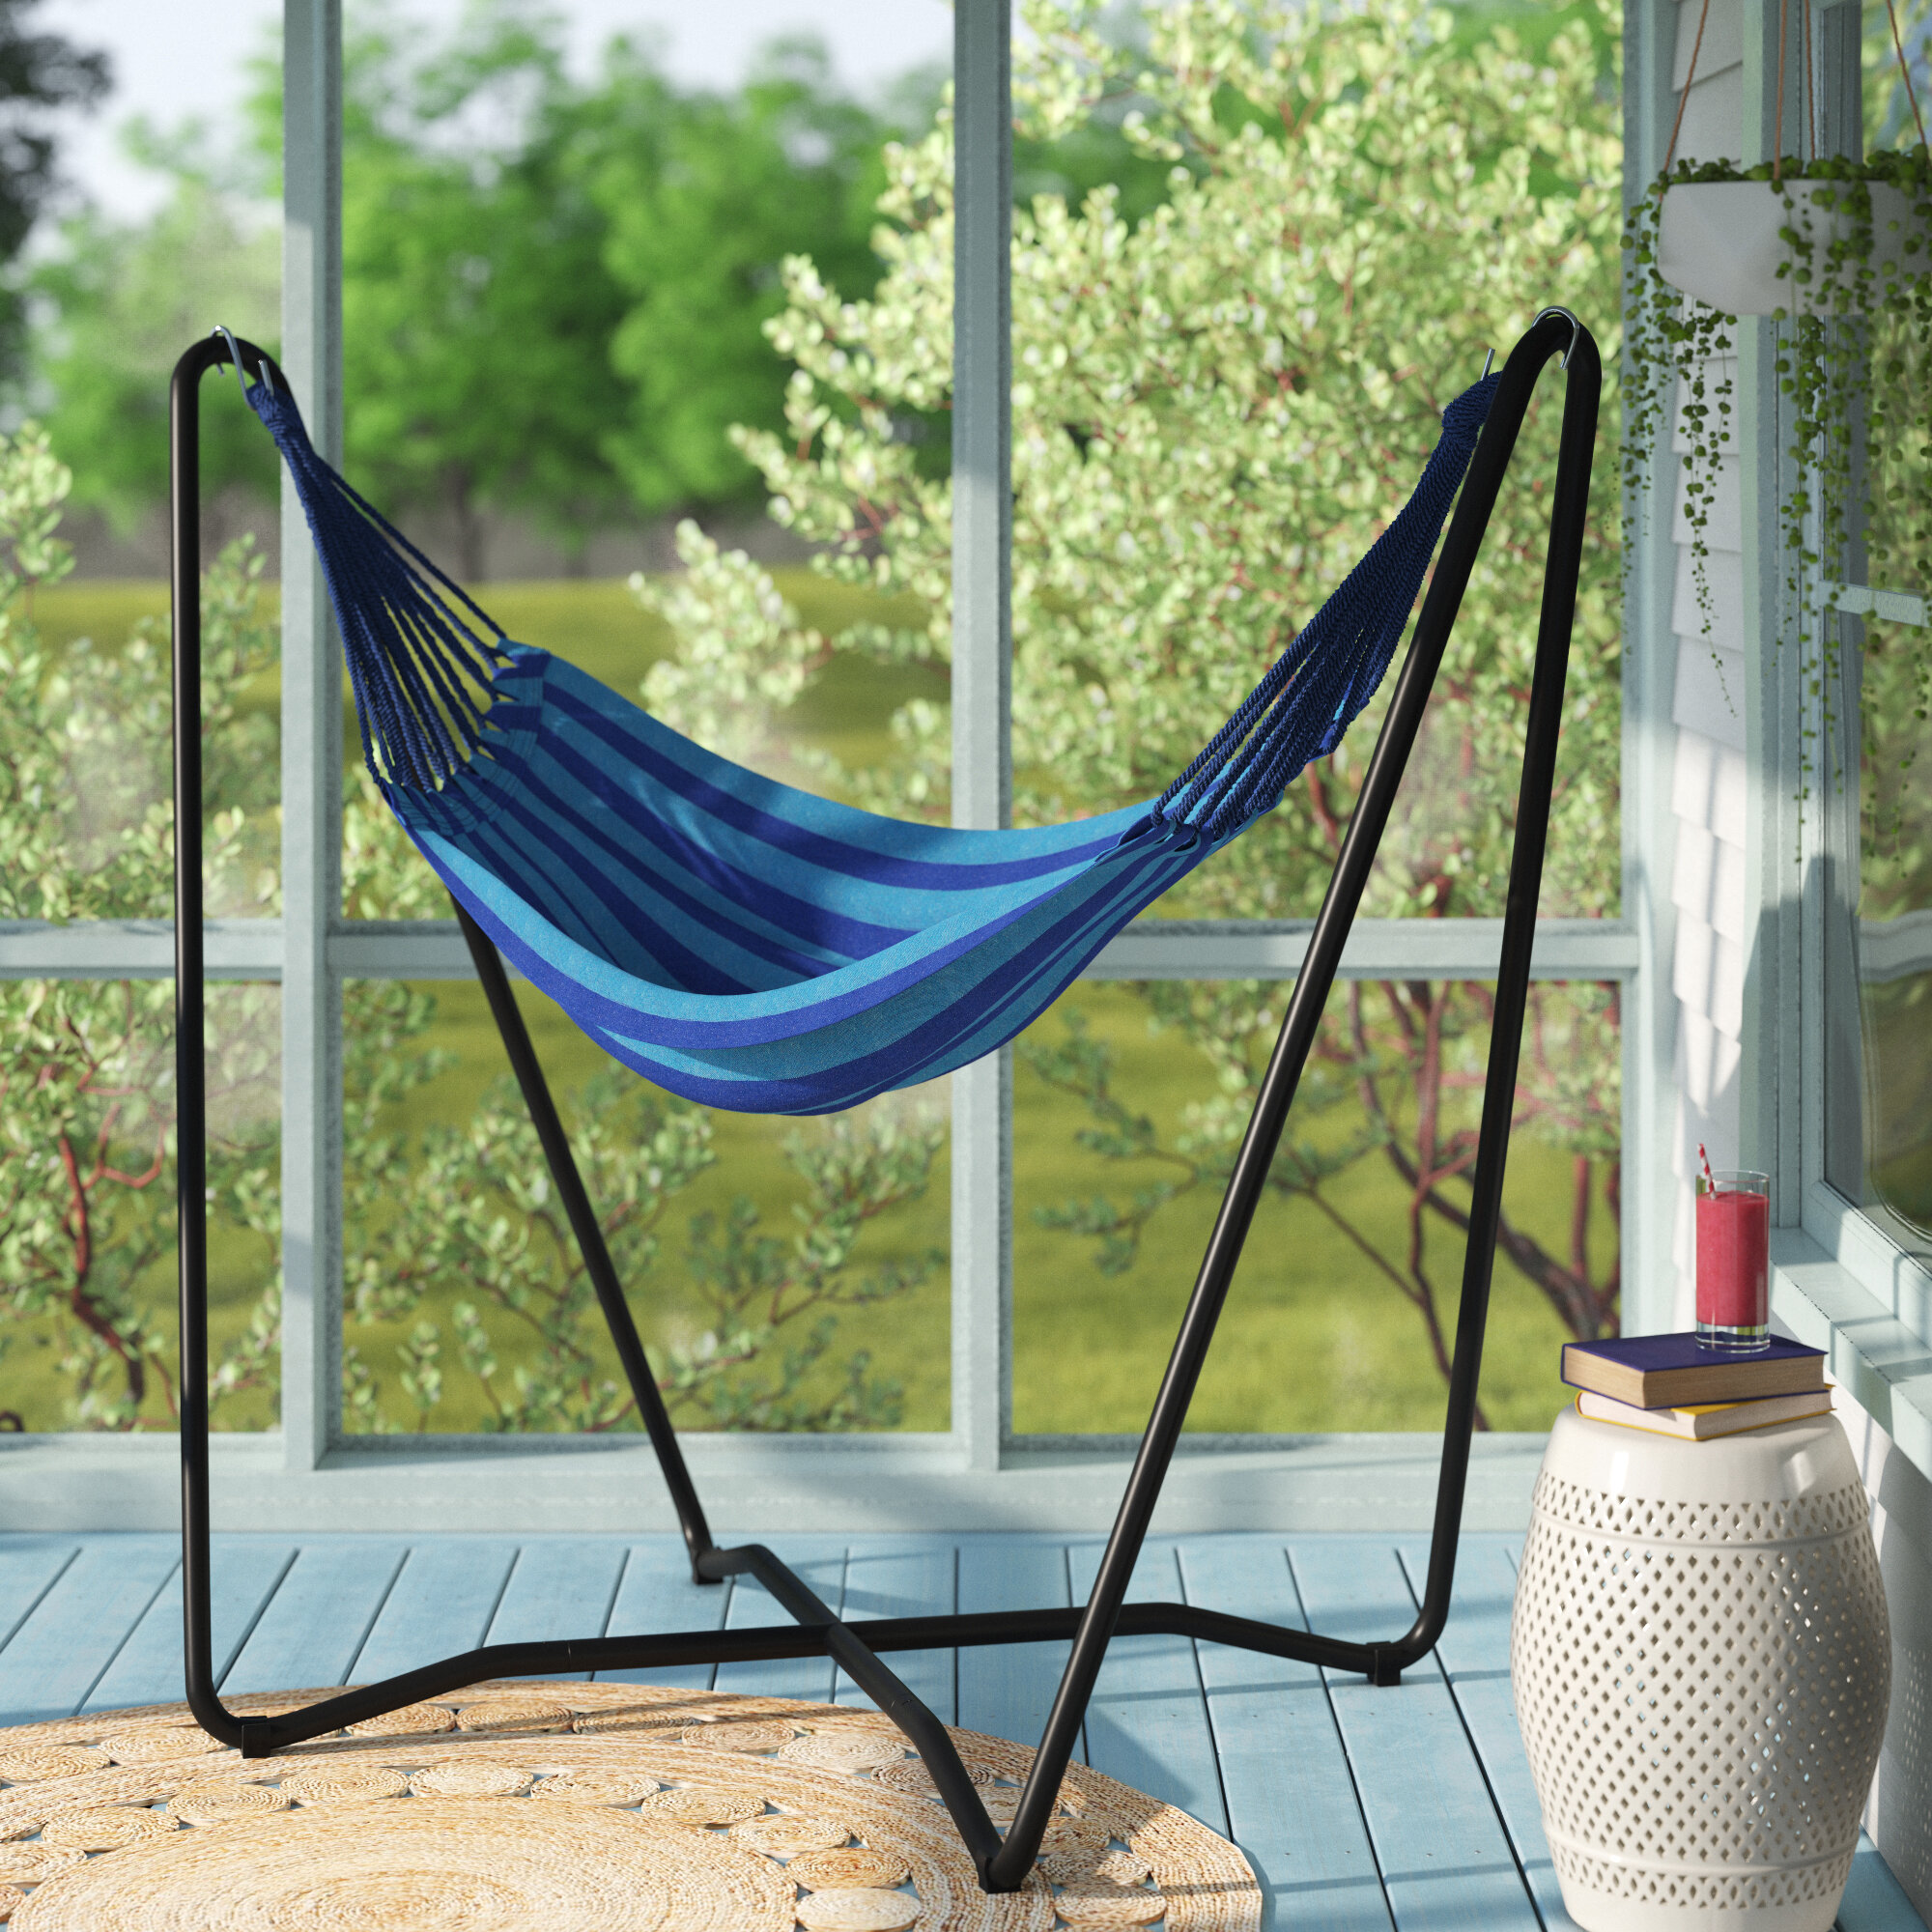 Details about   Steel Stand Hammock Swing Bed Chairs With Portable Carrying Case Outdoor Yards 